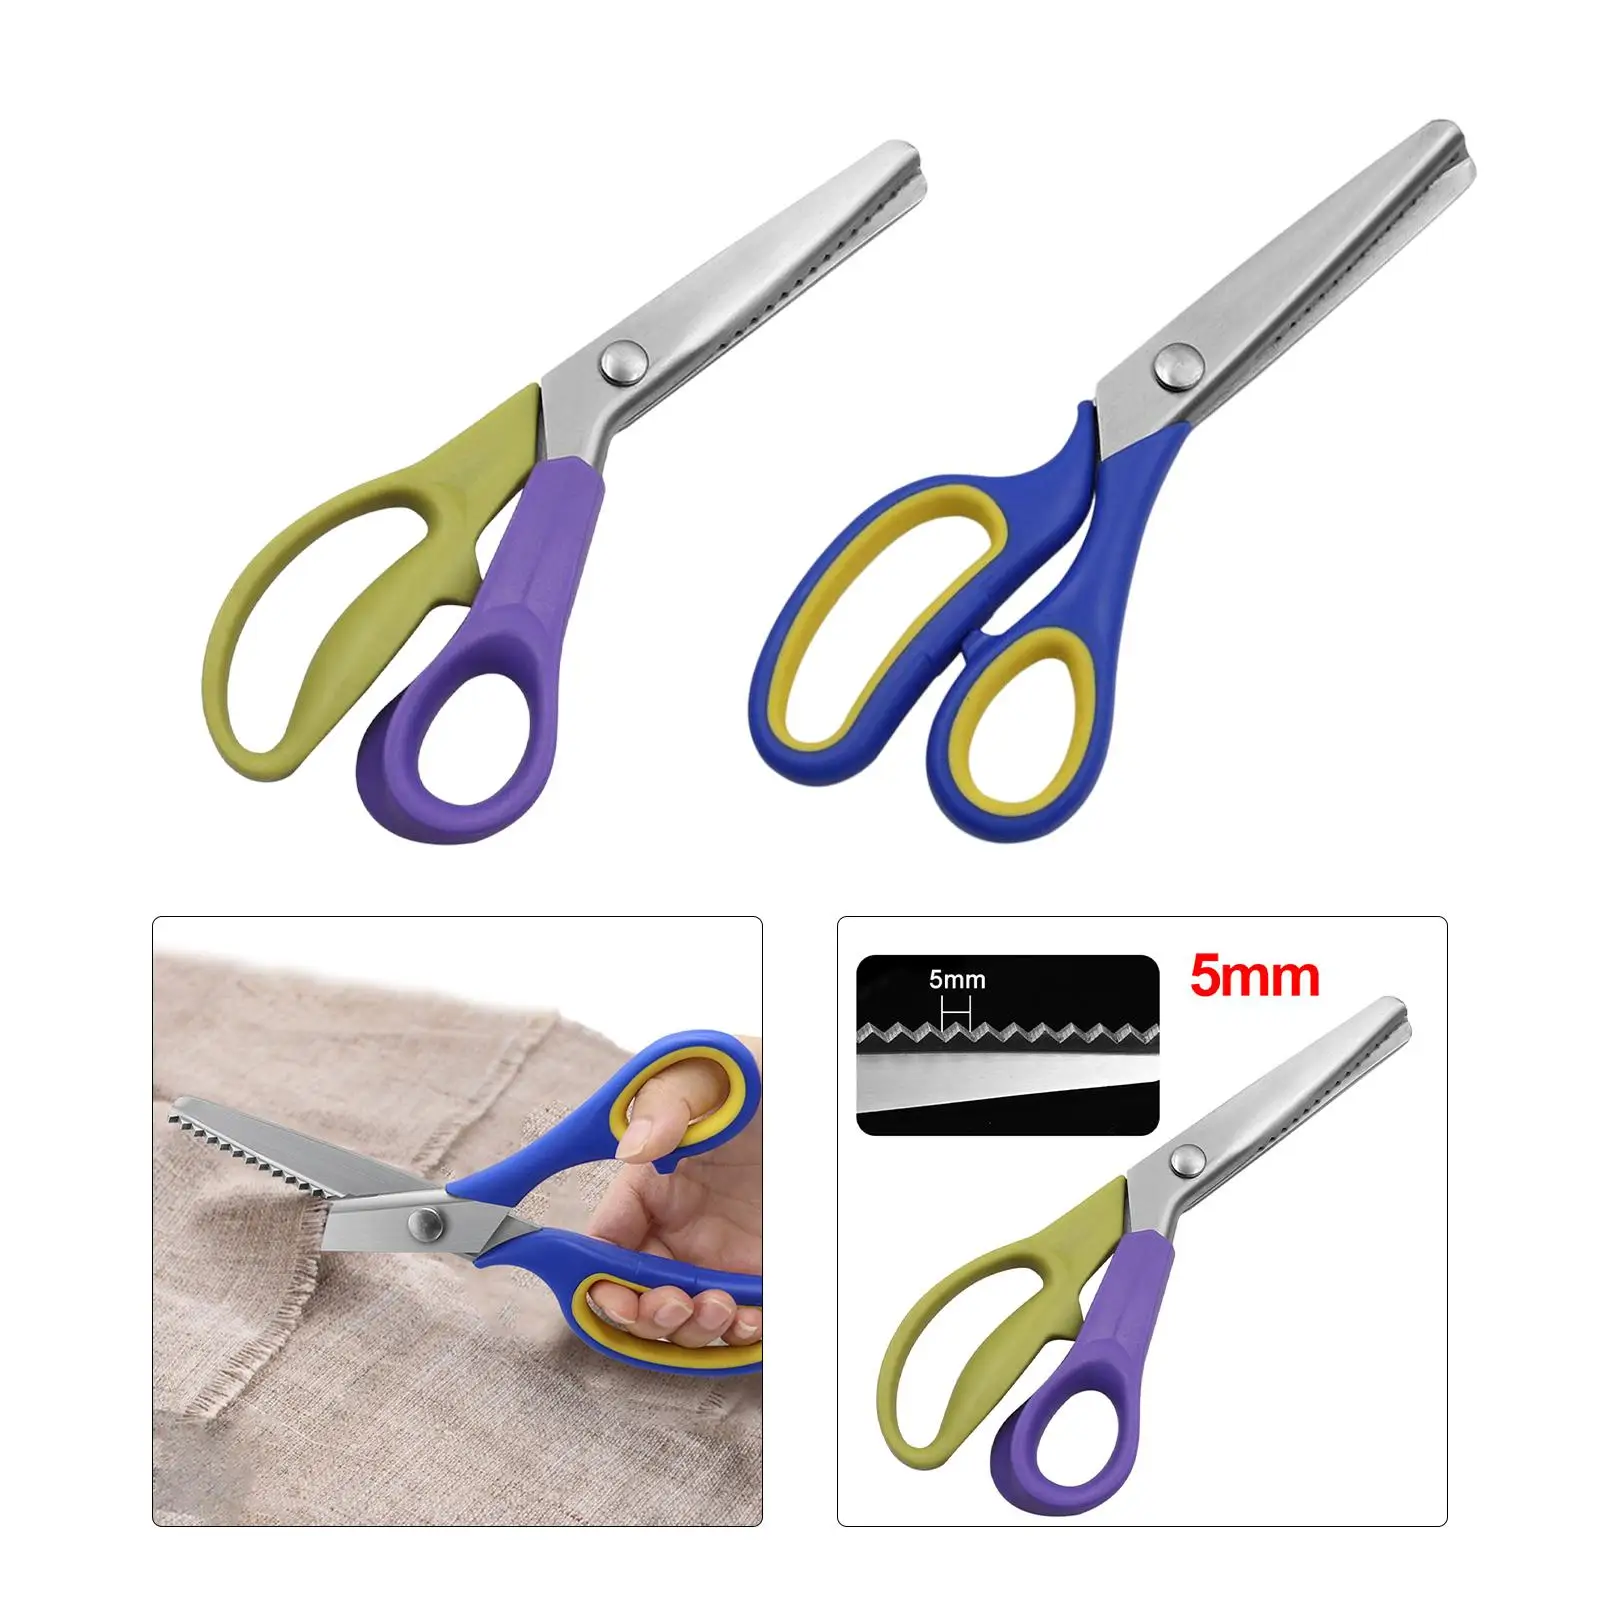 Cutting Fabric Cutter Sewing Tool Triangle Serrated Edges Handed Dressmaking for Home Quilting Cloth Needlework Handicraft